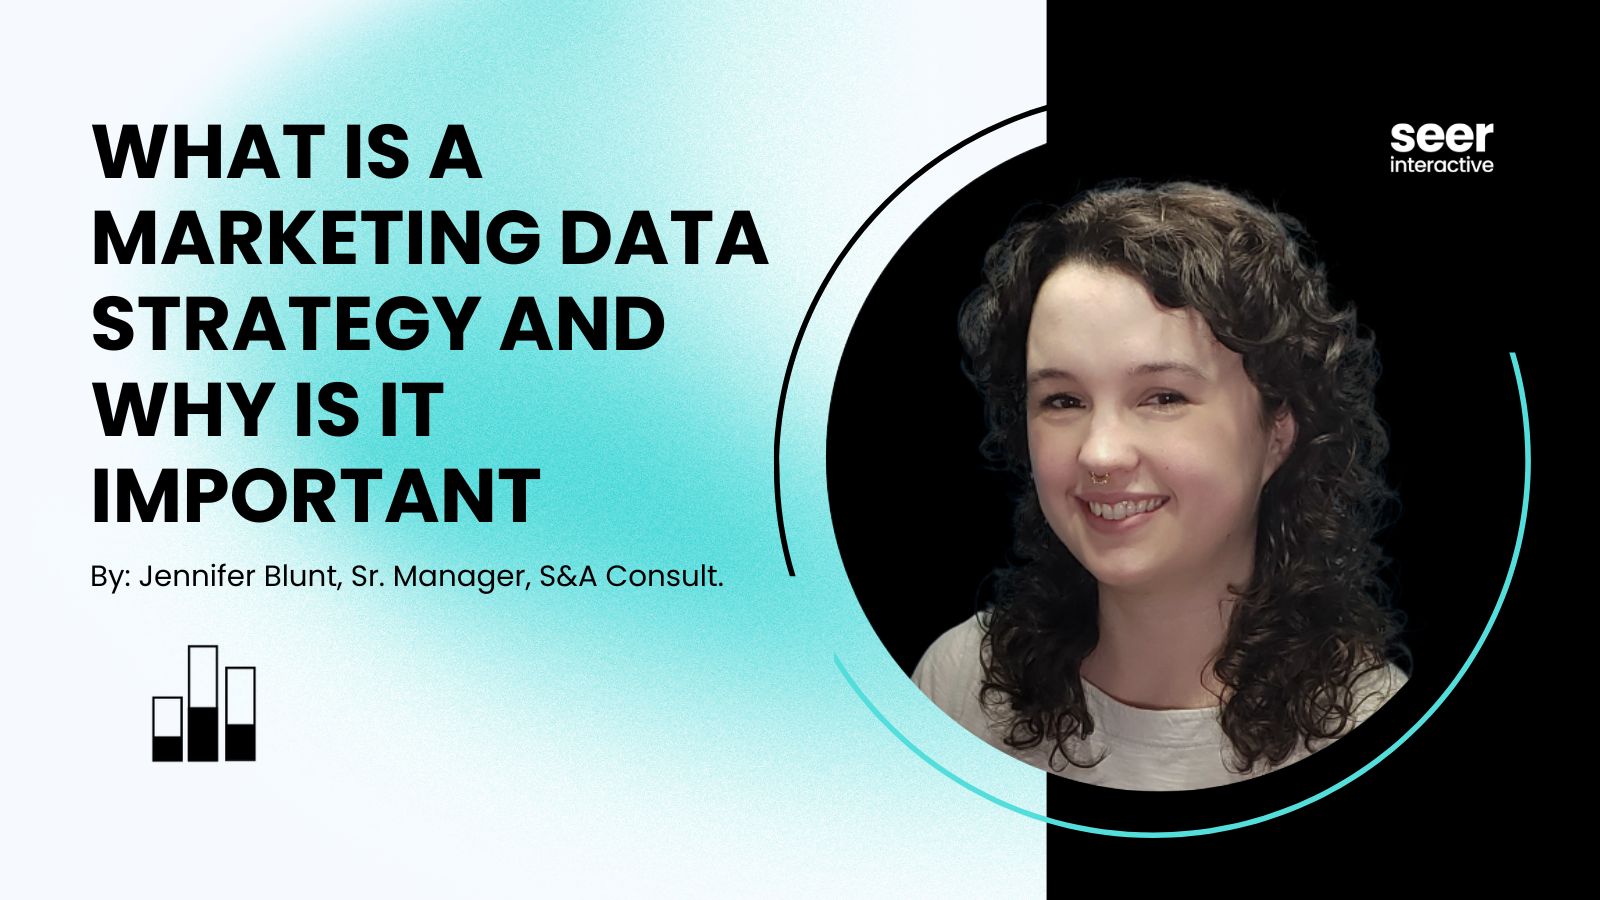 What is a Marketing Data Strategy and Why is it Important